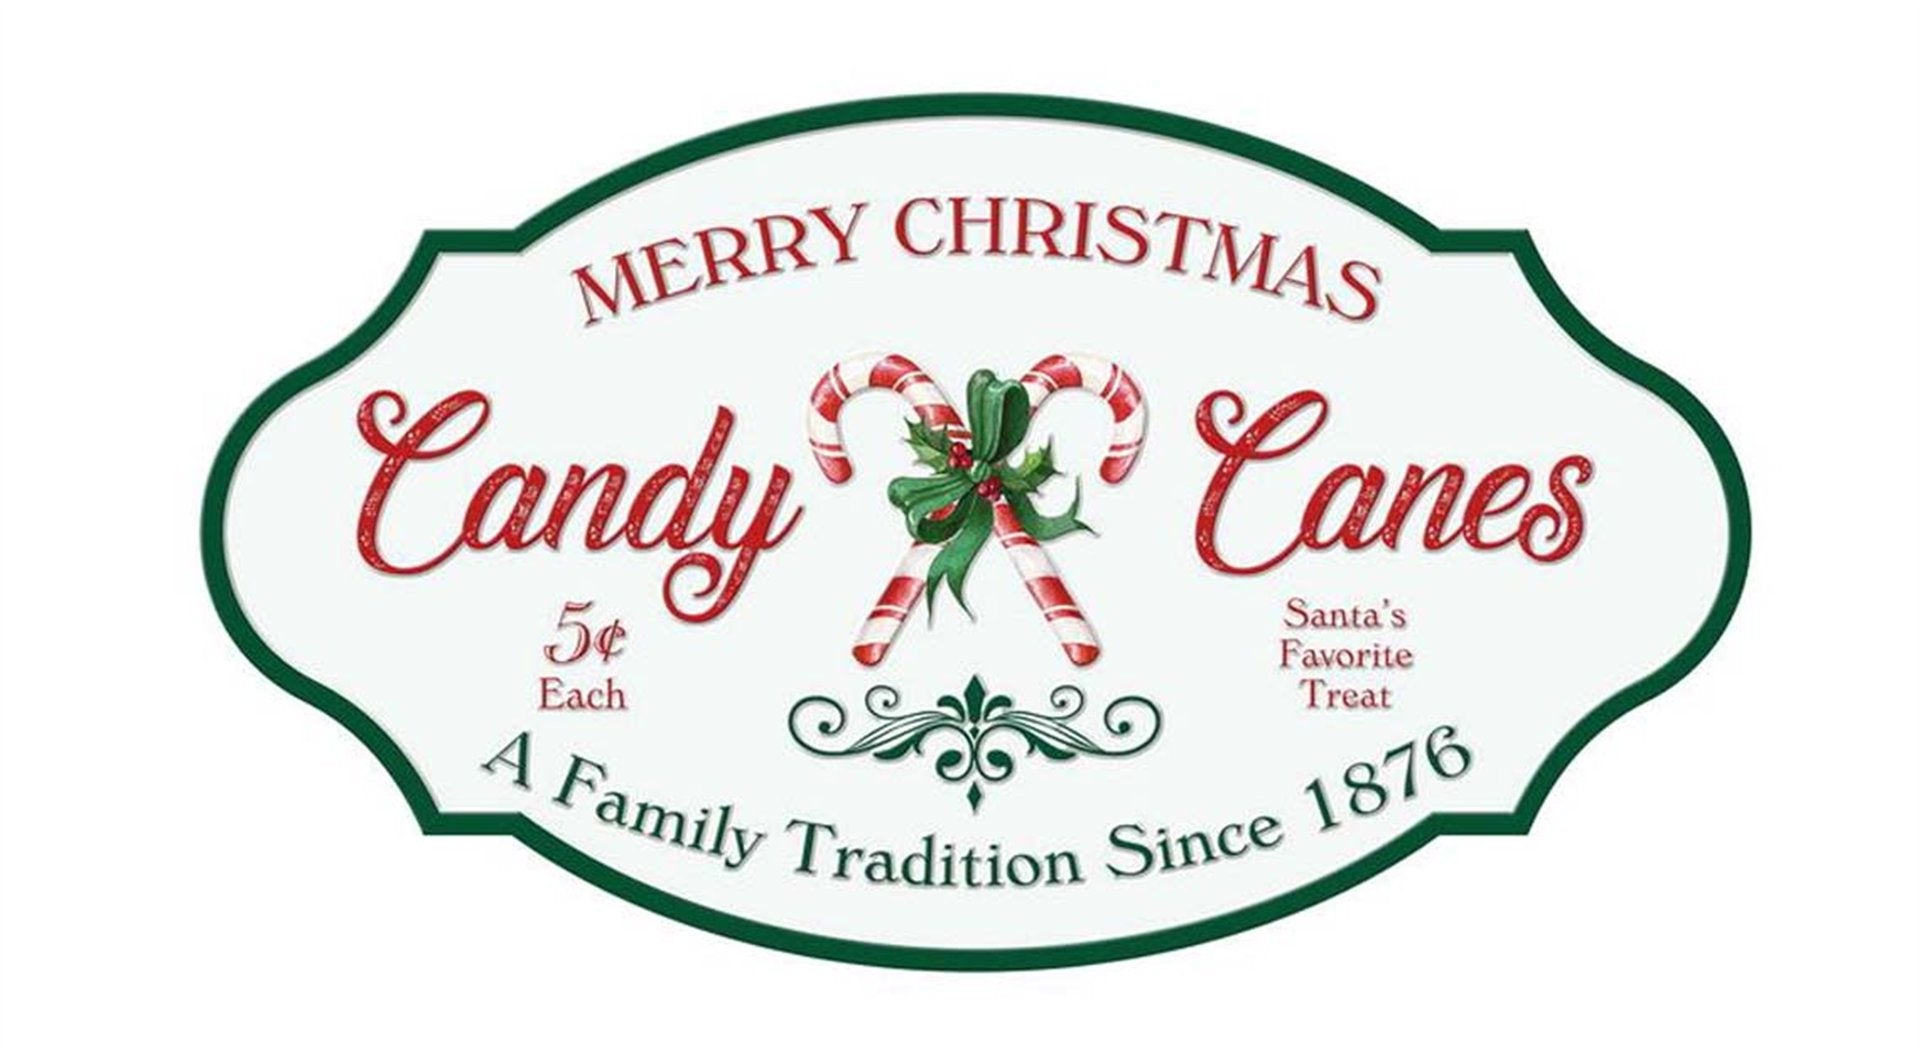 Candy Canes Sign